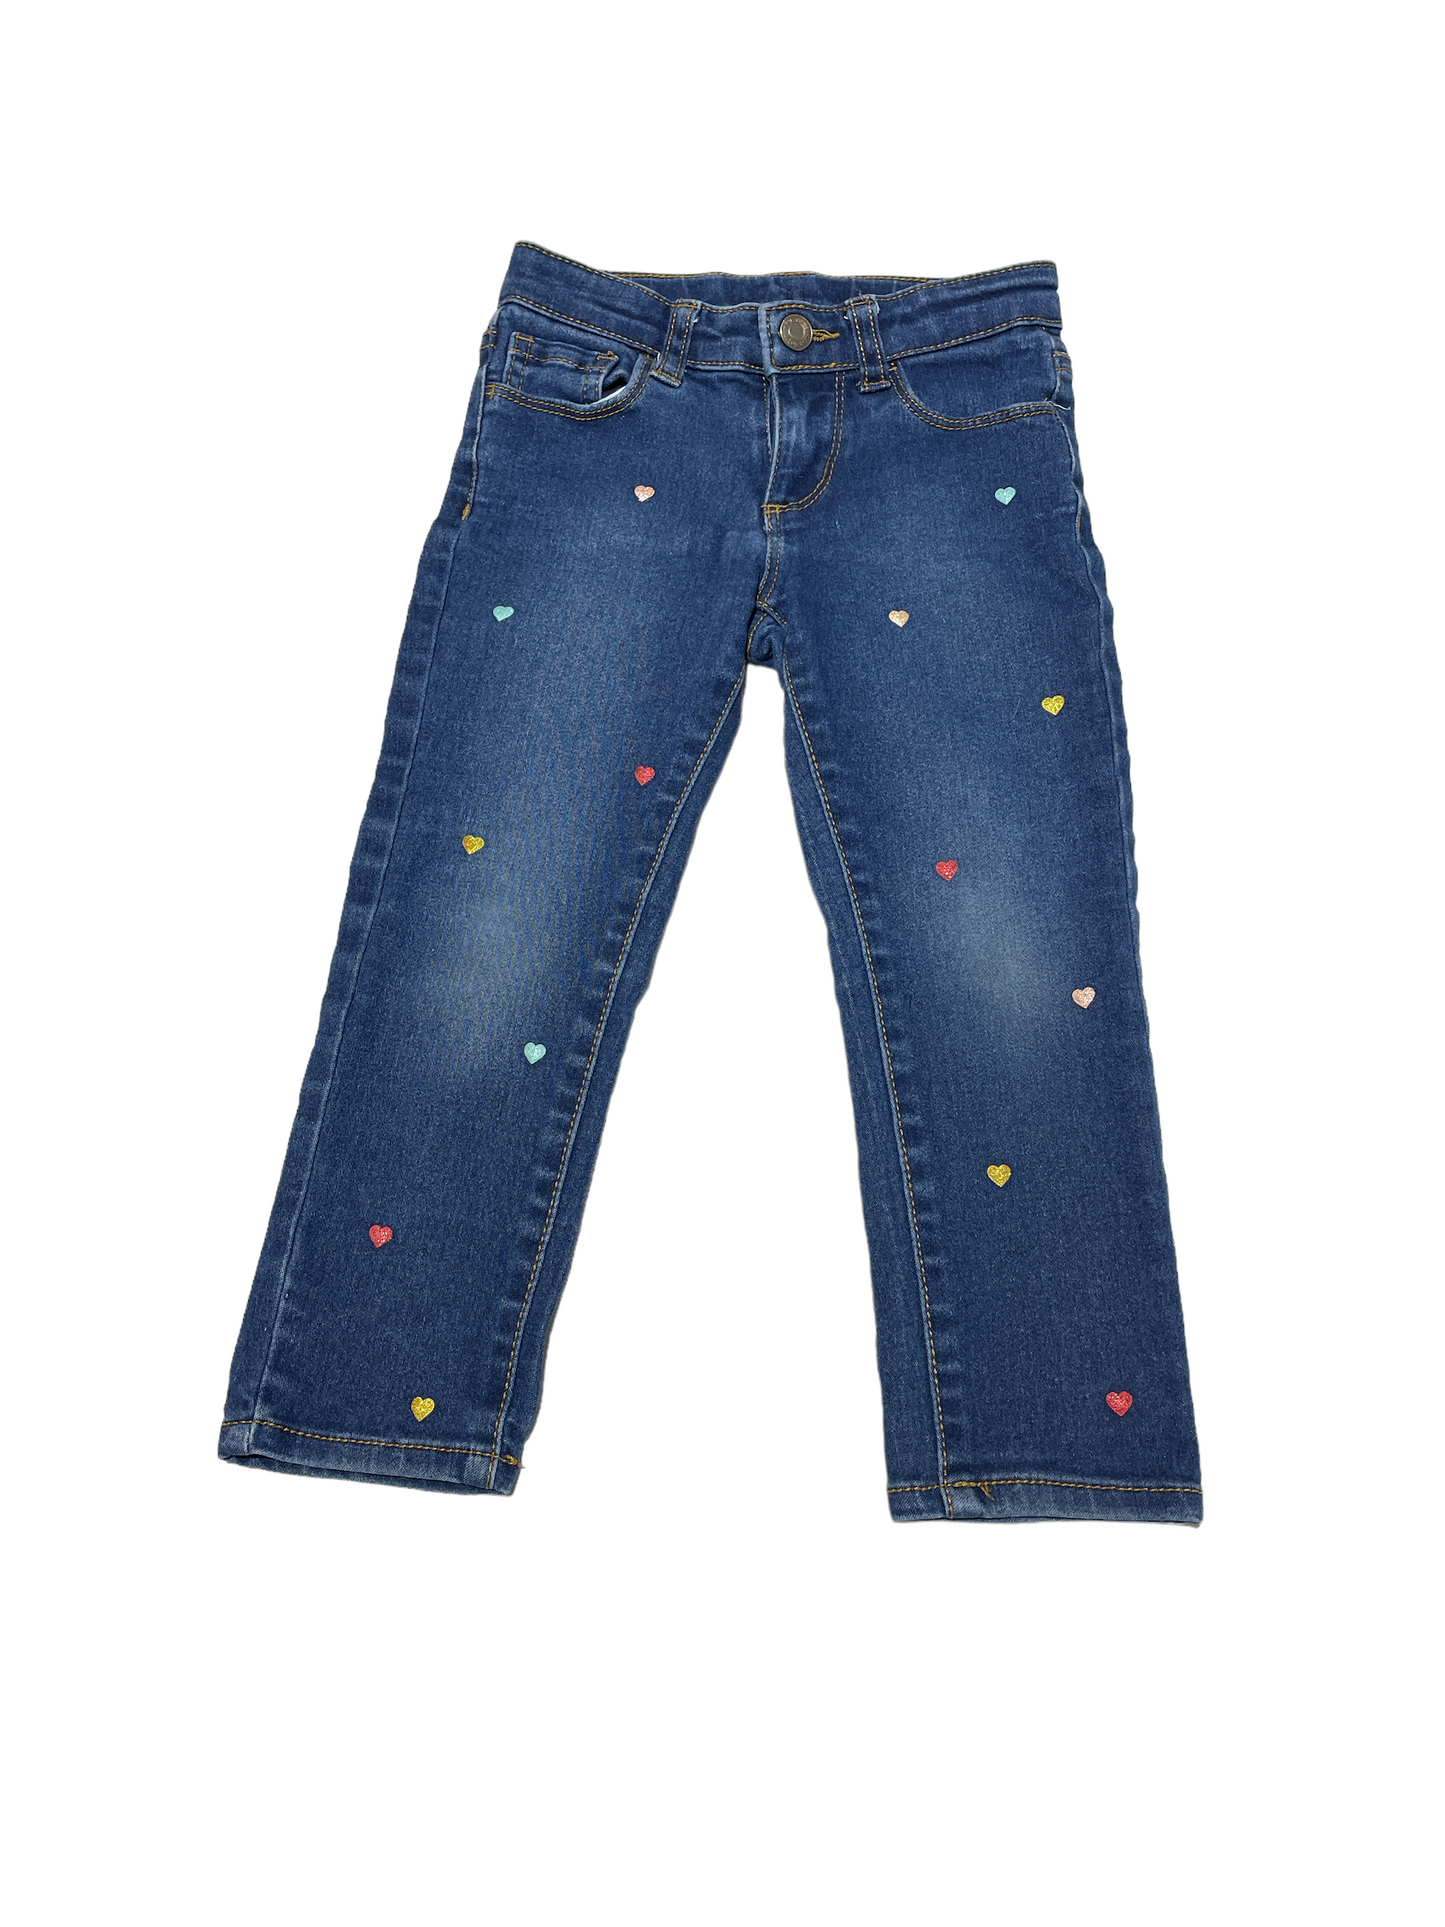 Little hearts stretch jeans 3T